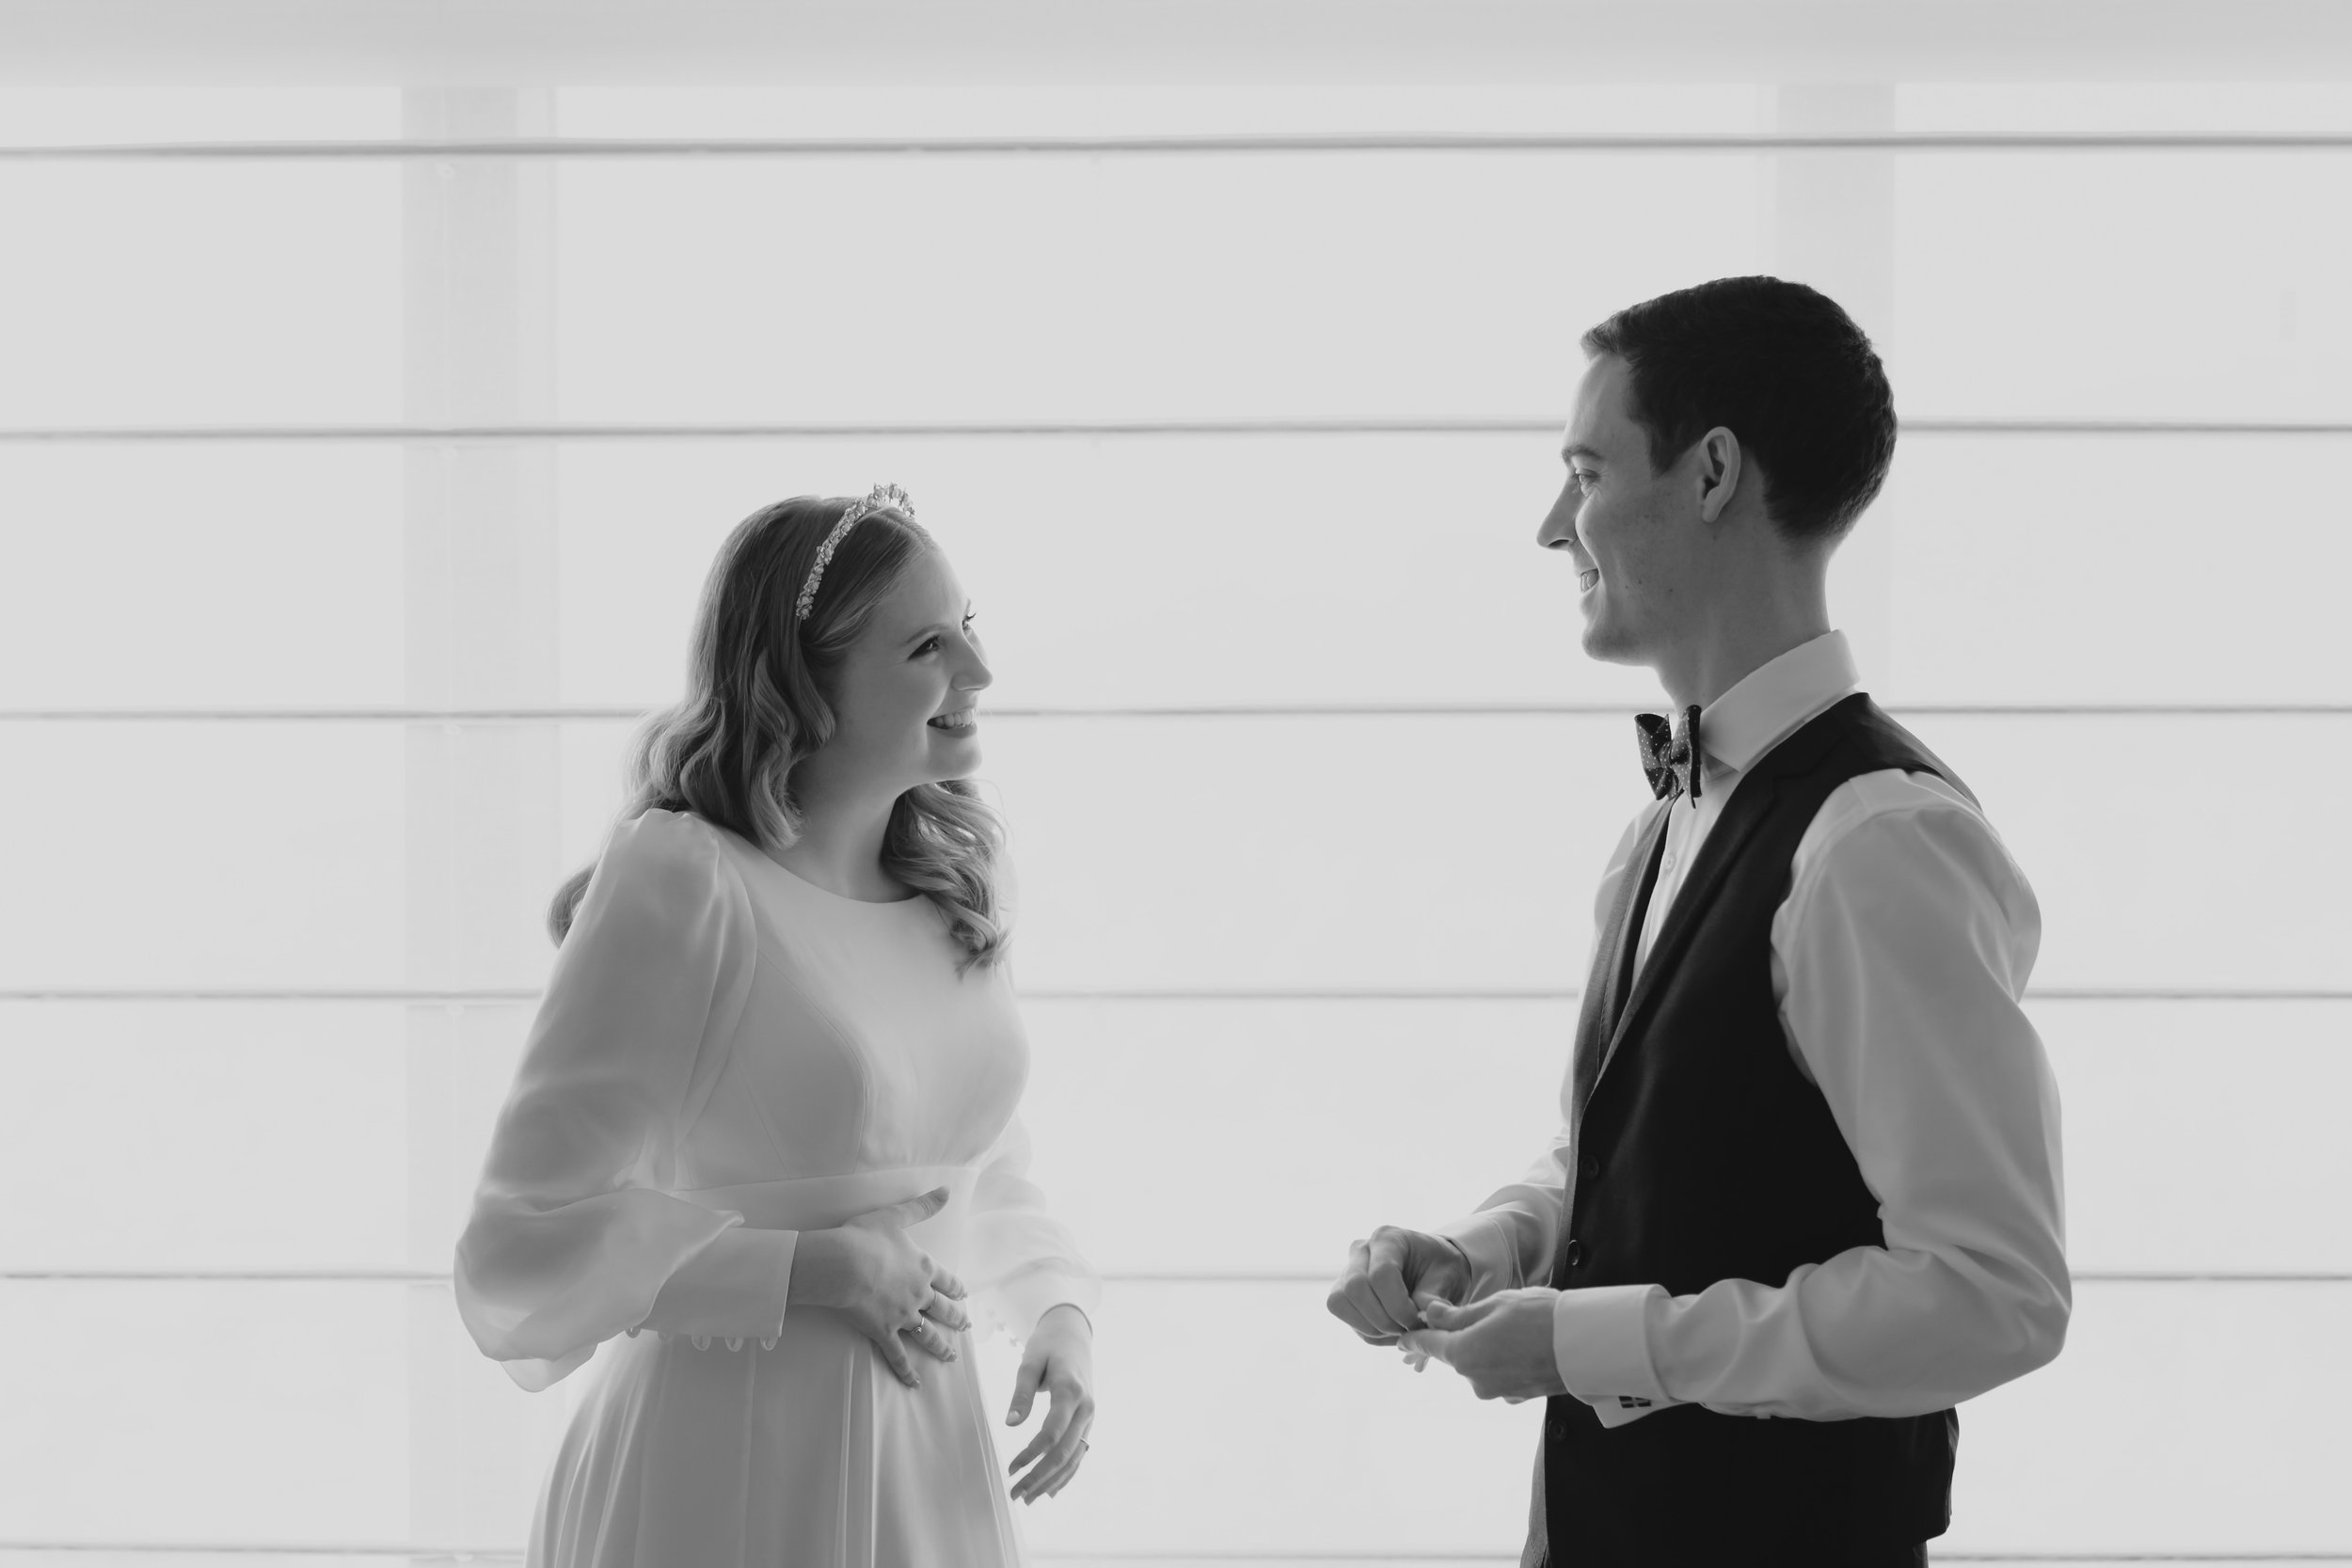 A bride and groom talking in front of a window at the Seoul Grand Hyatt Hotel